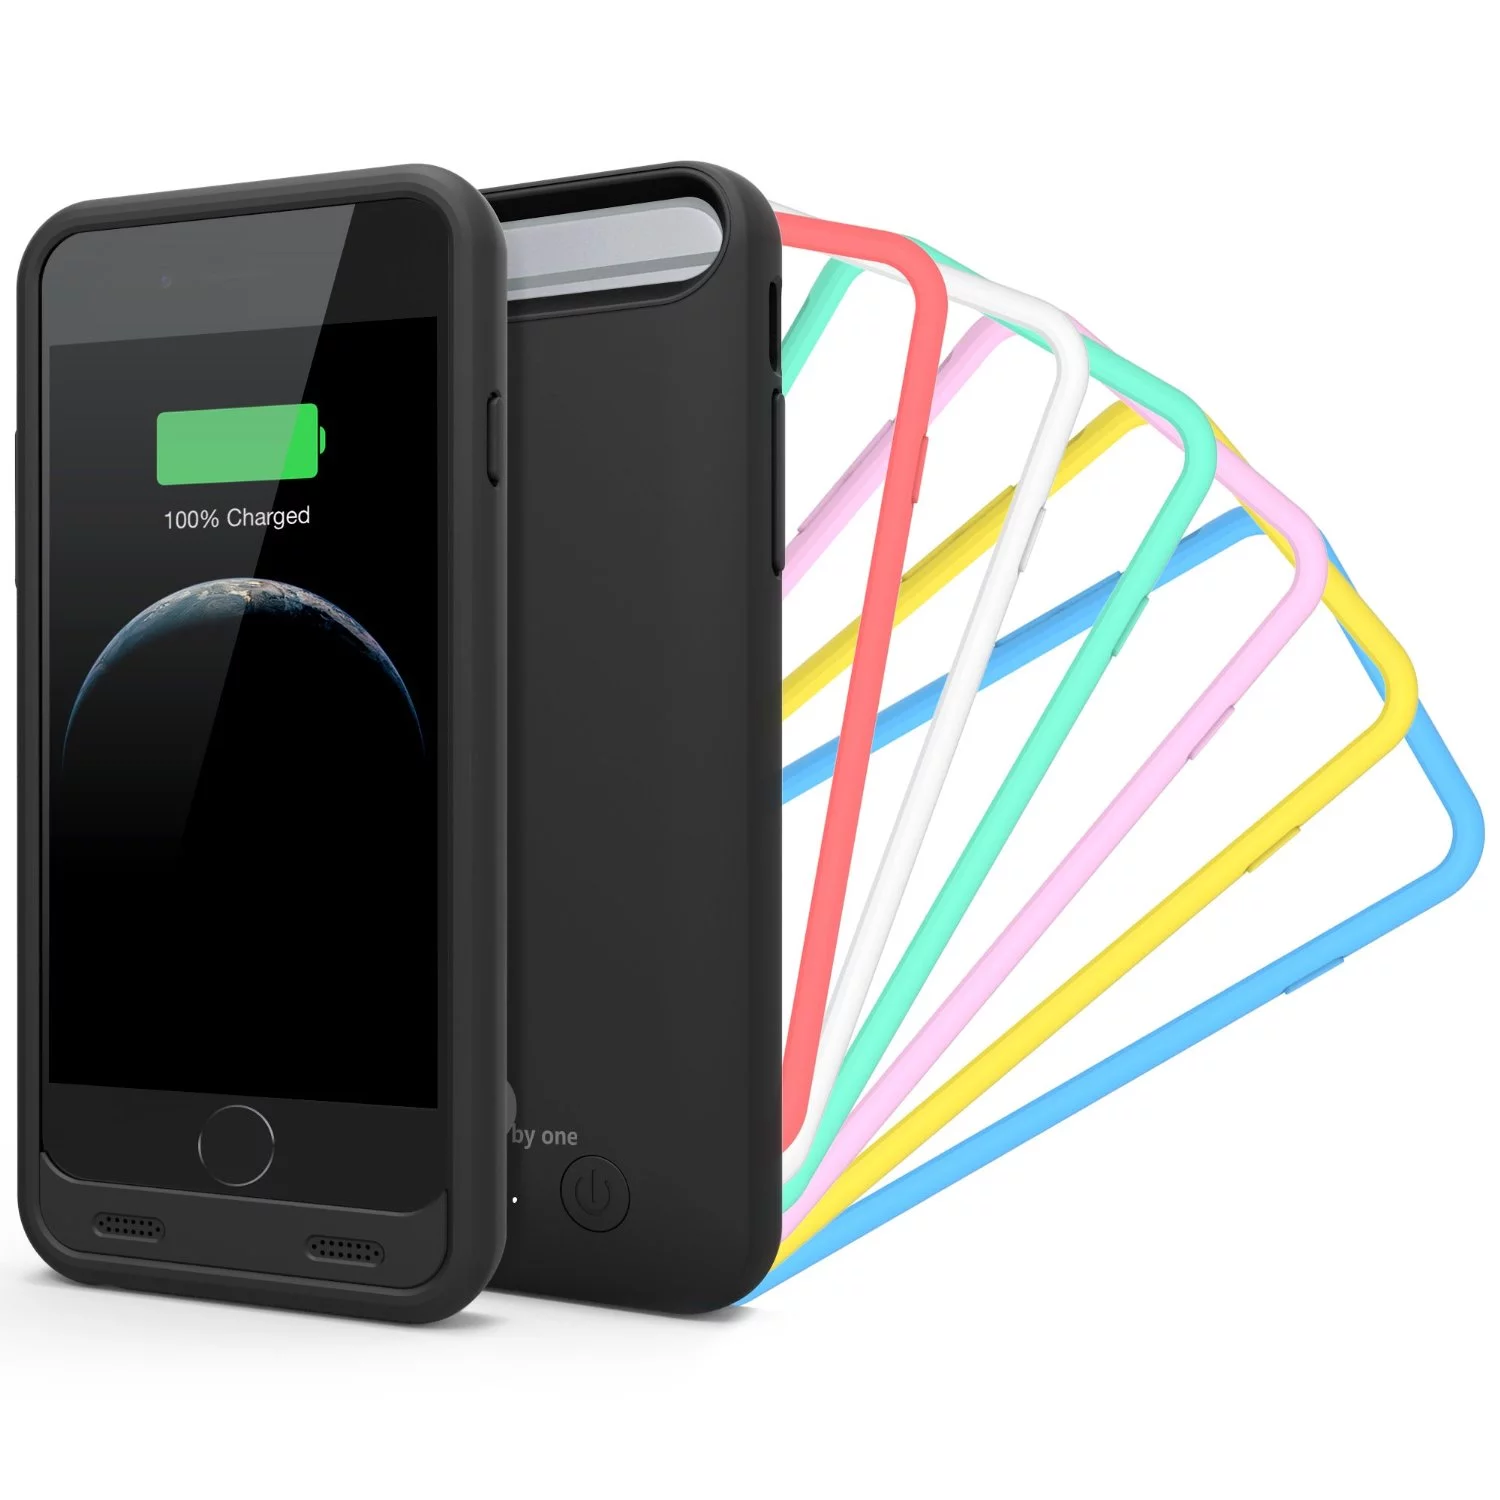 1byone® iPhone 6 Battery Case, Black Housing with Rainbow Frames [7 Colors] - 3100mAh Rechargeable Protective Charging Case